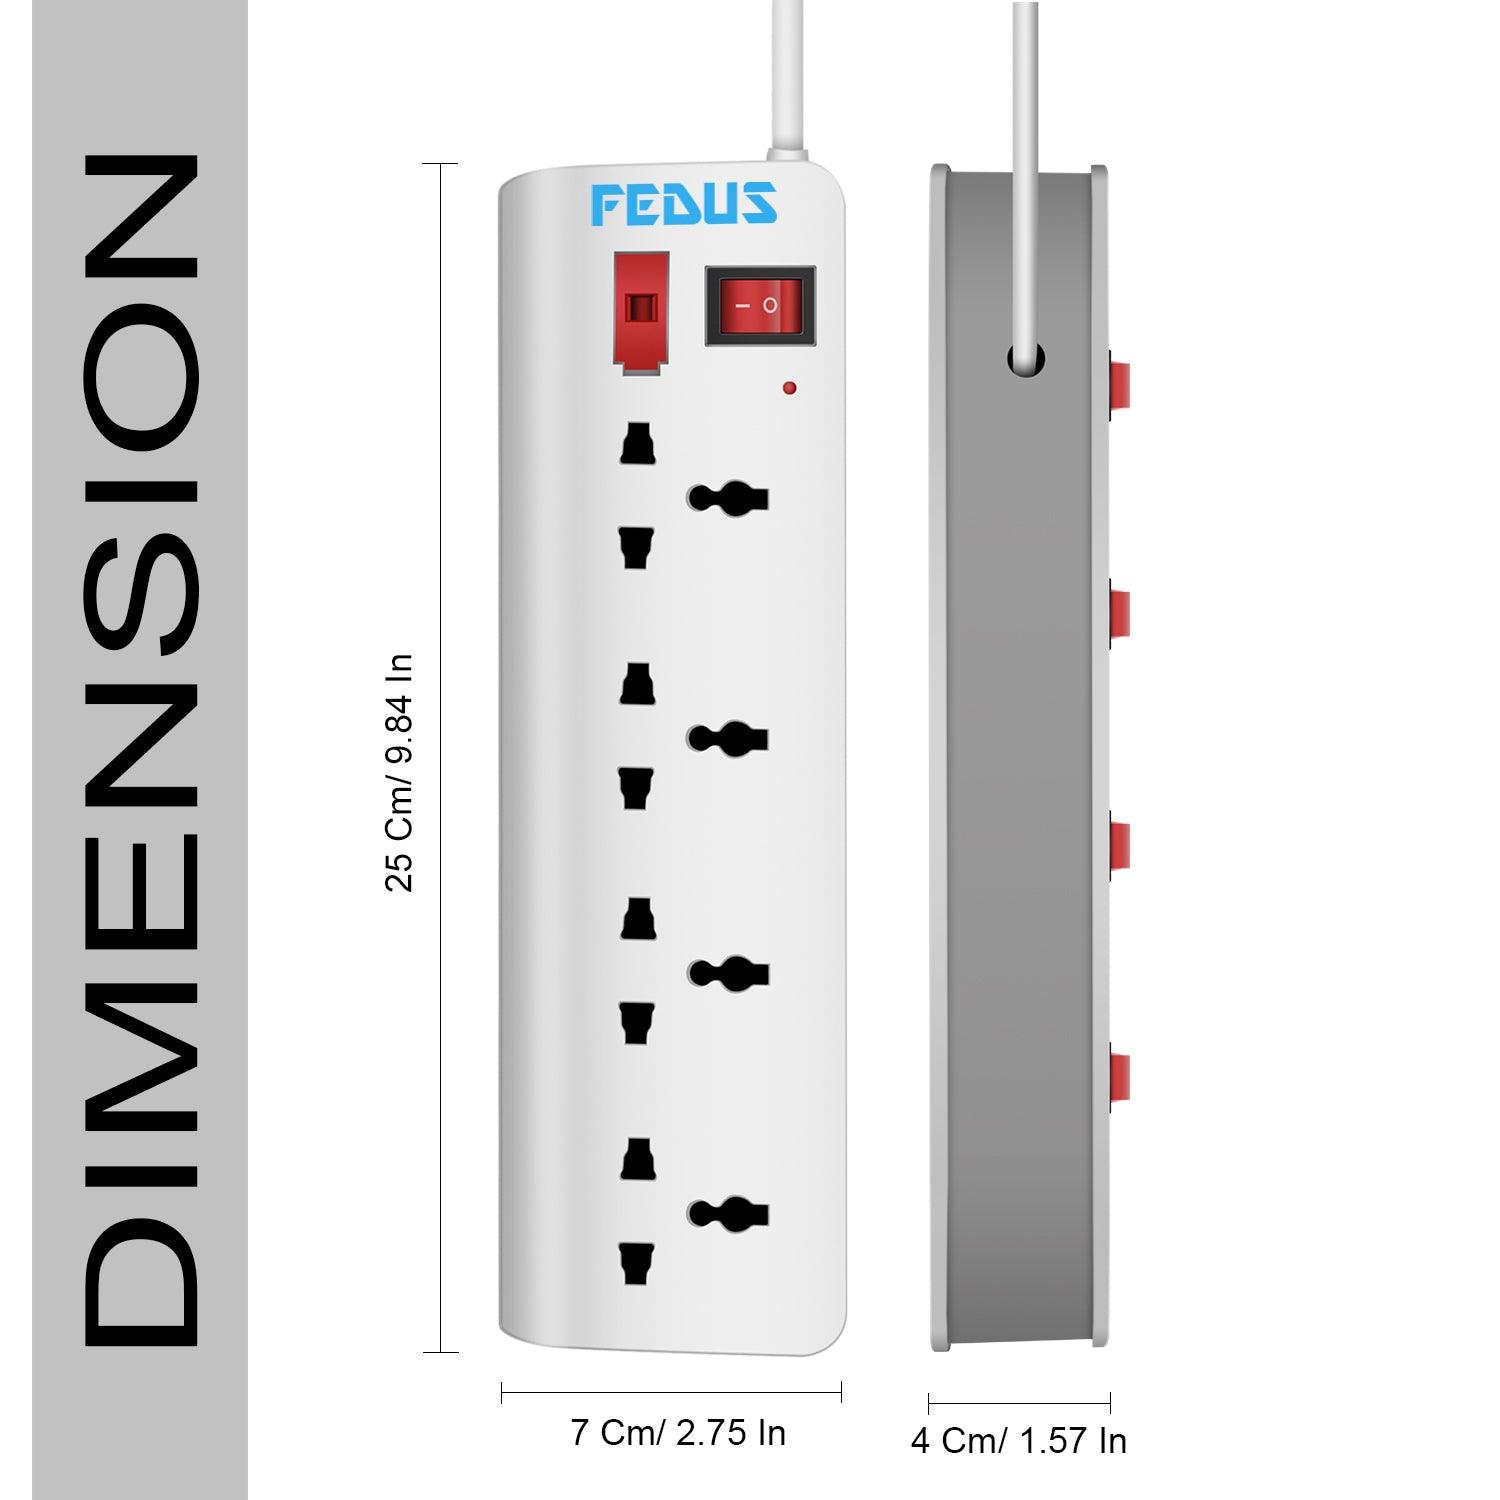 FEDUS Long Wire switch board extension|extension boards with switch,extension board with long wire,extension cords, extension board for computer,surge protectors spike buster,switch board - FEDUS